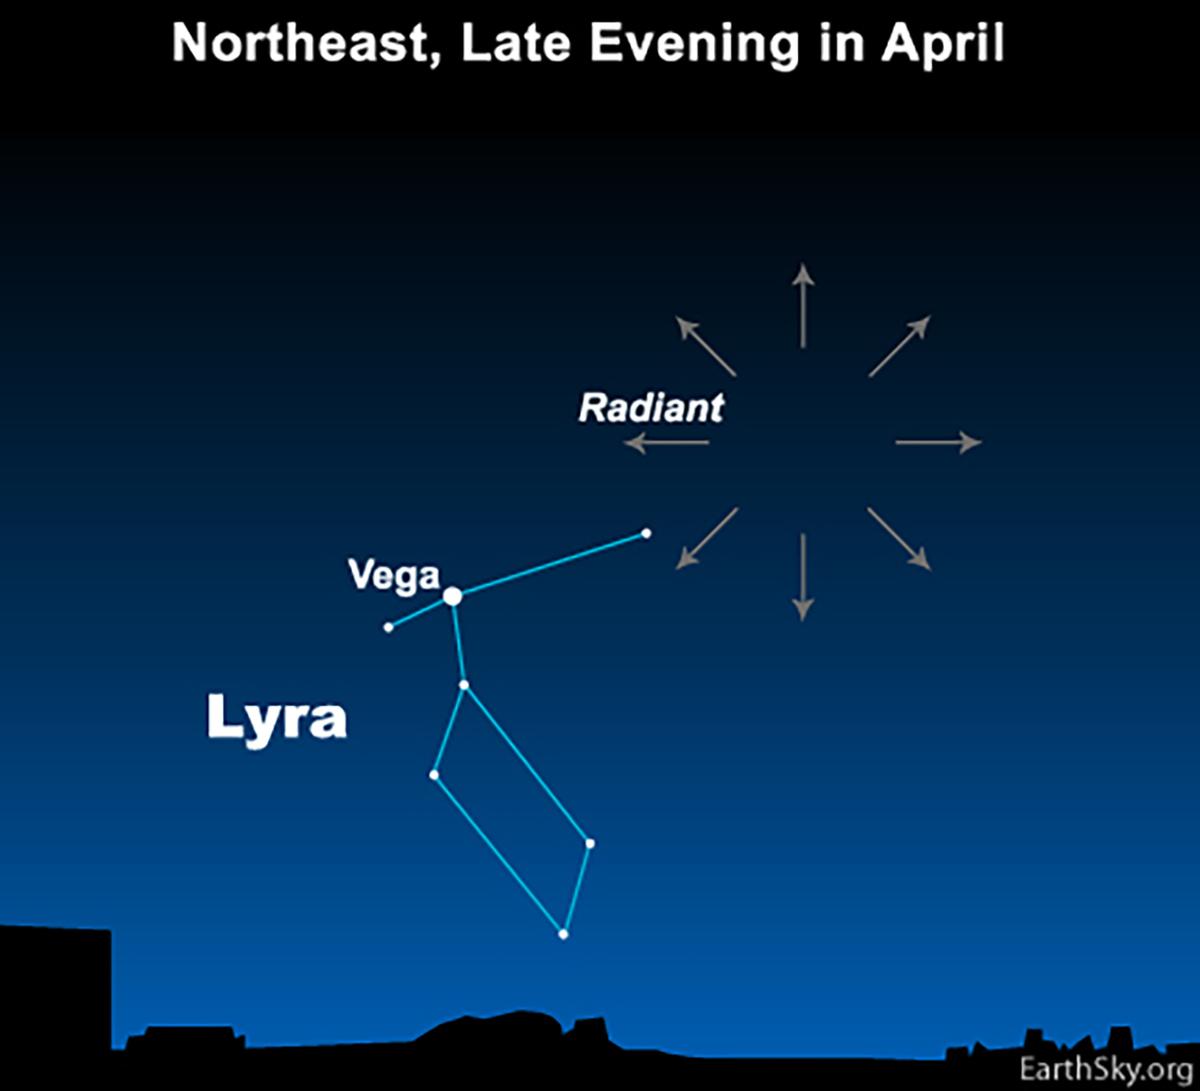 The Lyrids' radiant point near the constellation Lyra. (<a href="https://commons.wikimedia.org/wiki/File:Lyrid_meteor_shower_radiant_point.jpeg">DeborahByrd</a>/CC BY 3.0)